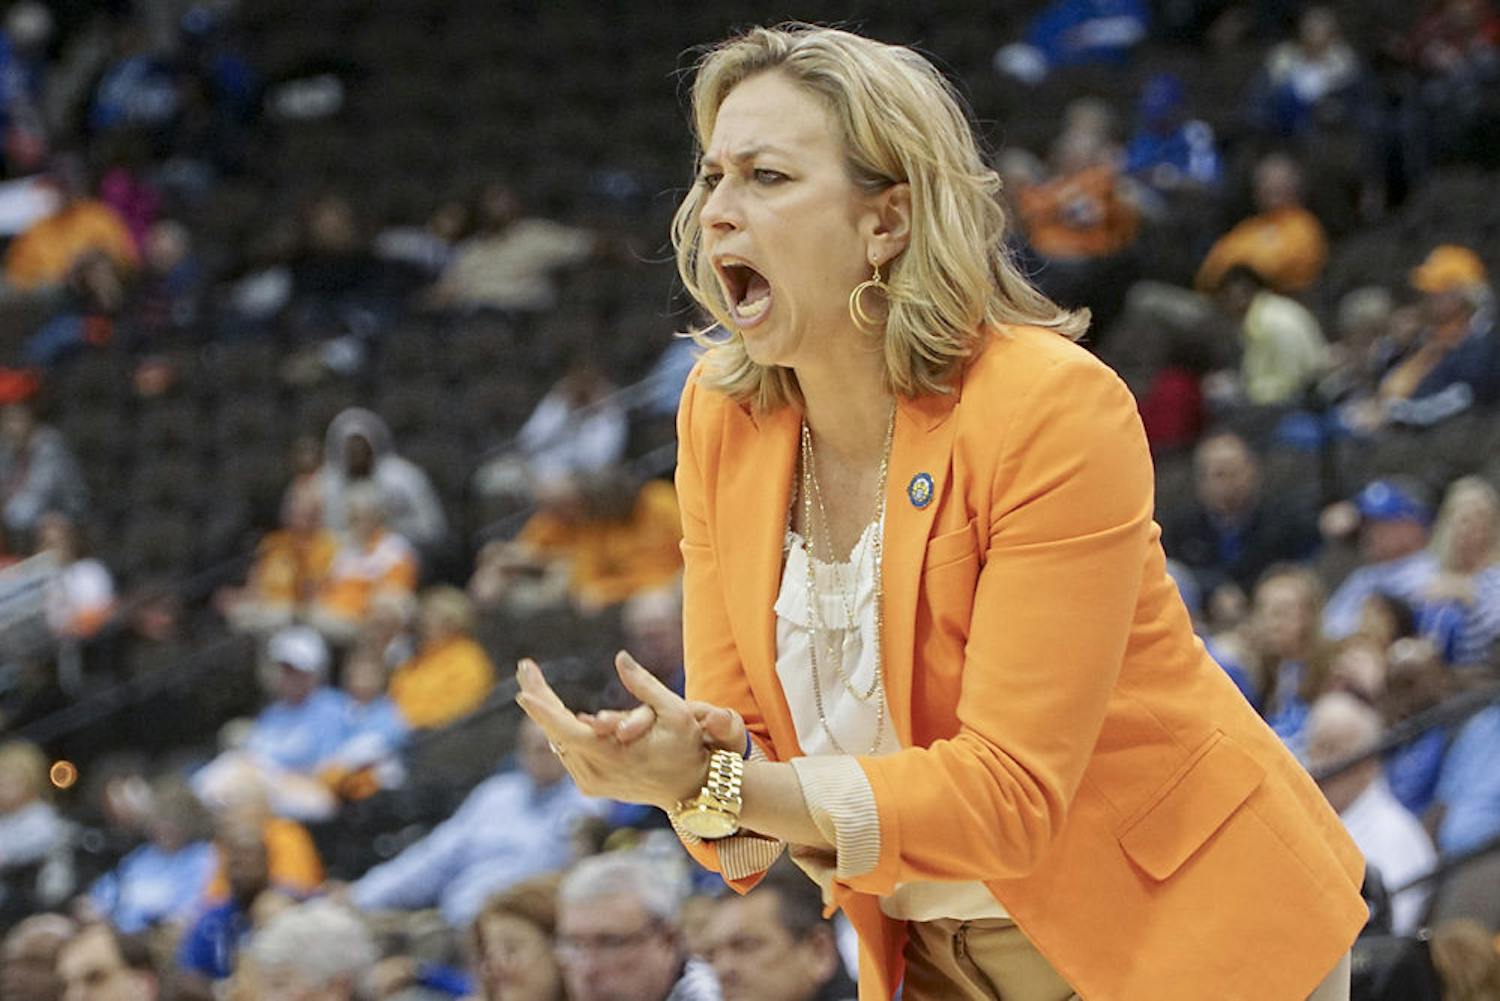 Amanda Butler calls out instructions during Florida's 92-69 loss to Kentucky at the SEC Tournament on March 4, 2016.